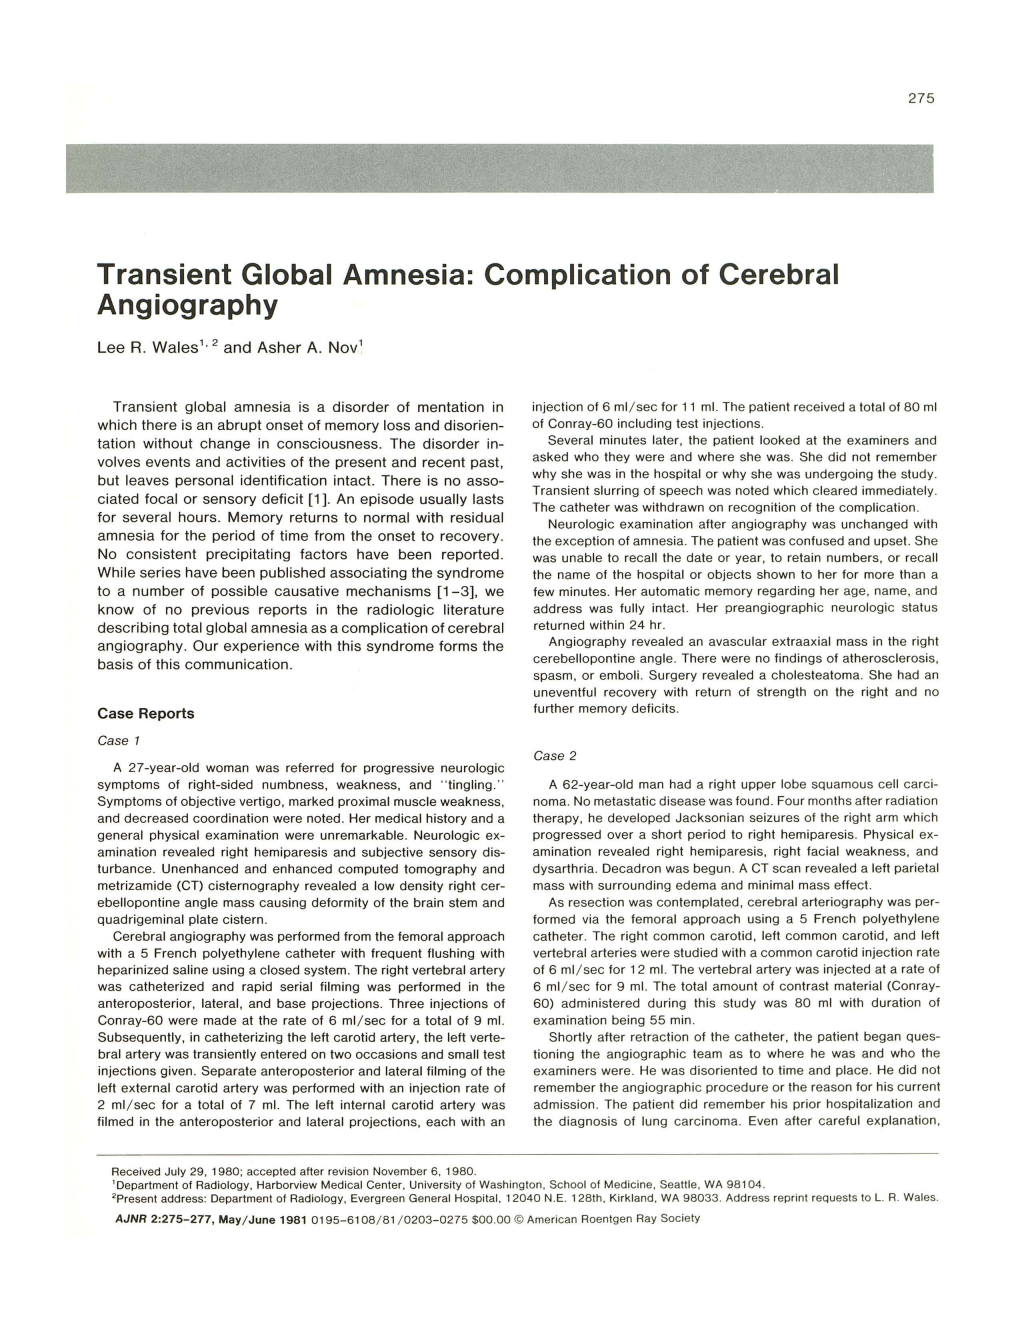 Transient Global Amnesia: Complication of Cerebral Angiography